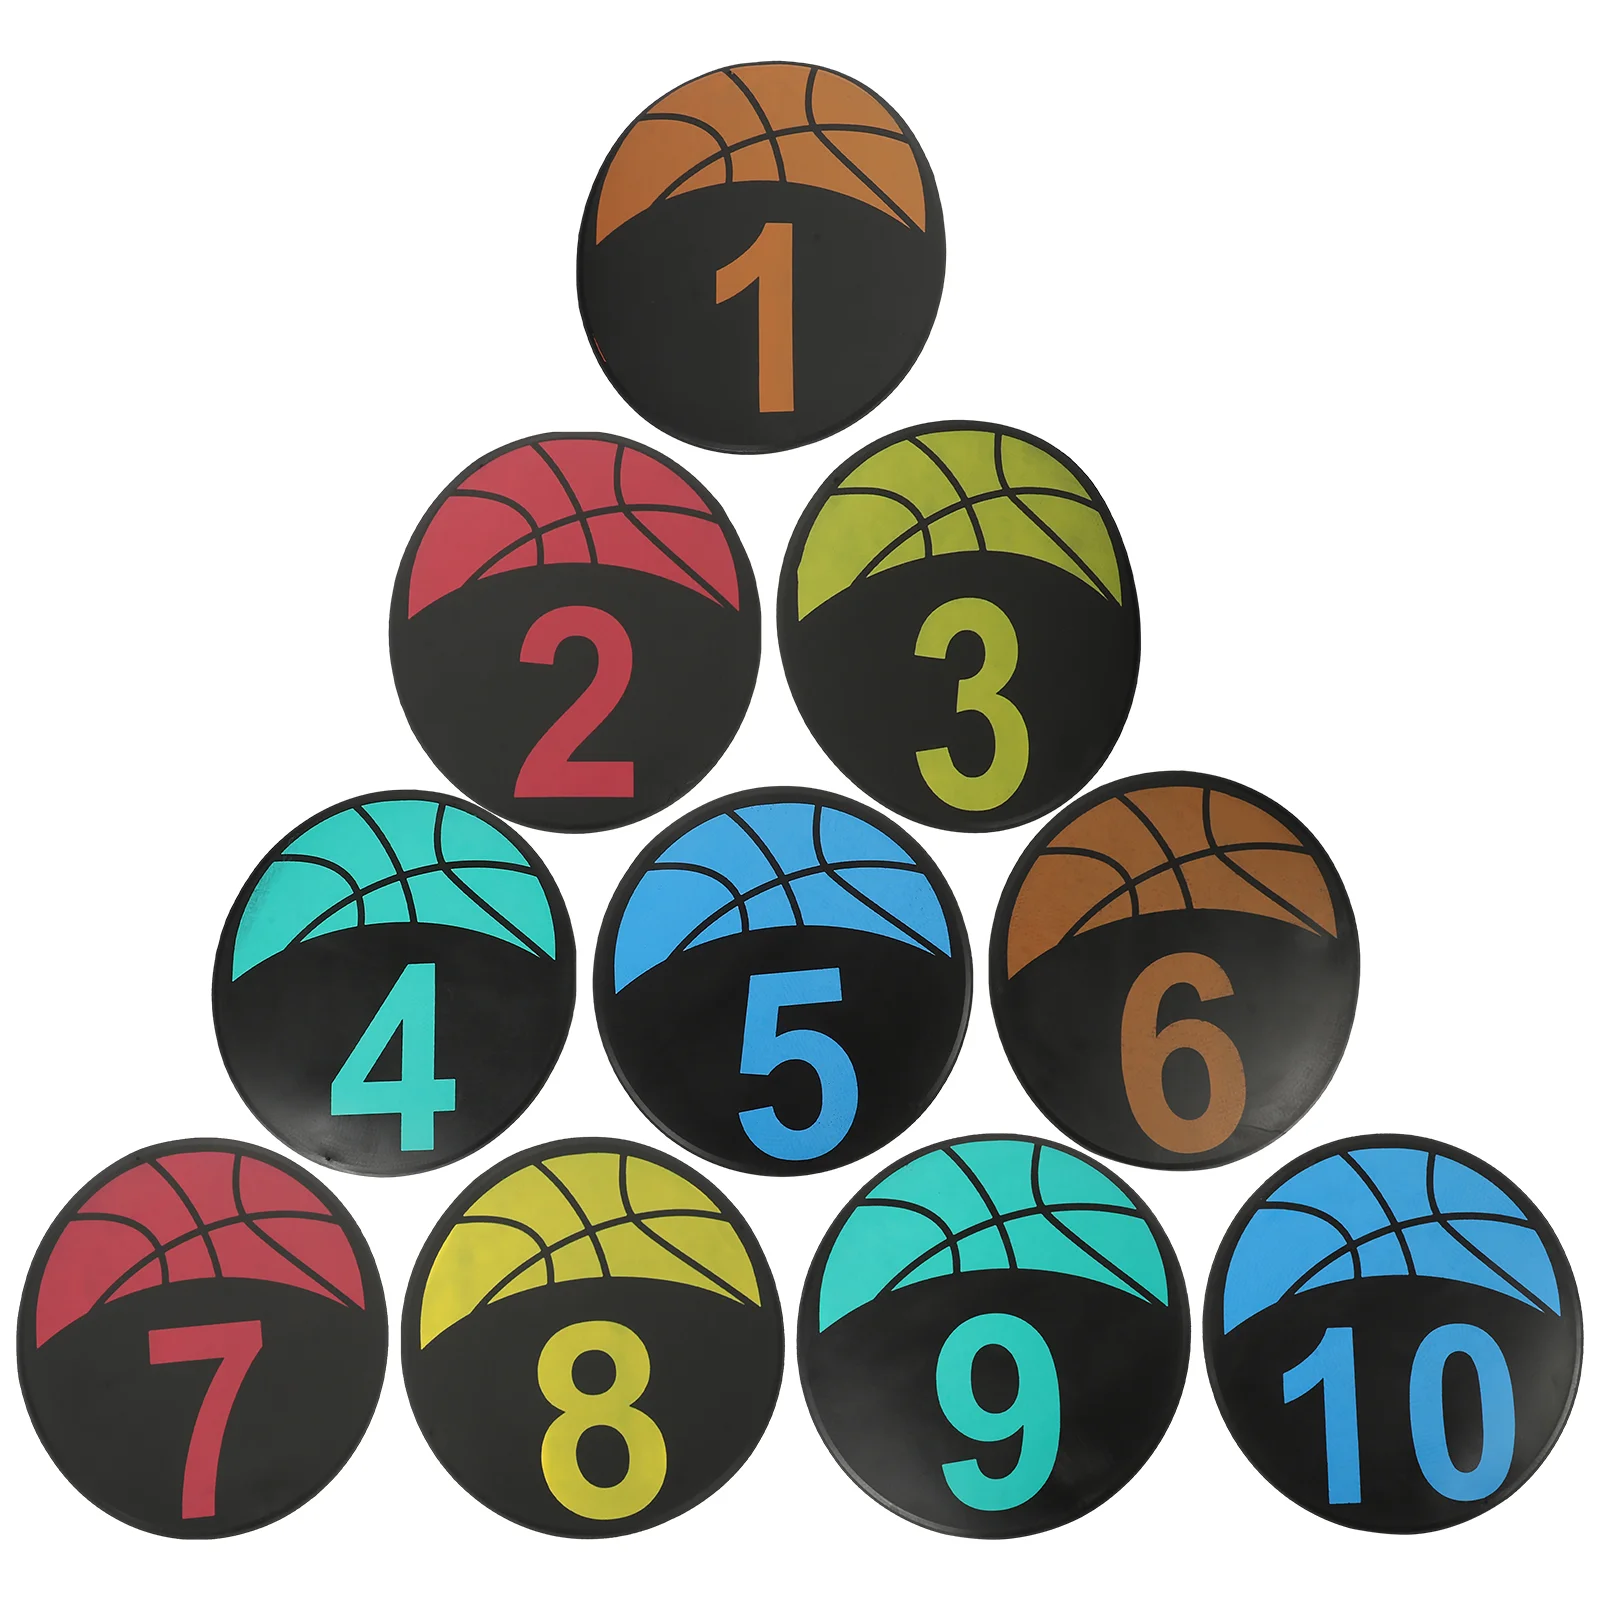 

10 Pcs Exercising Tool Football Soccer Training Equipment Markers Discs Tpe Sign Pads